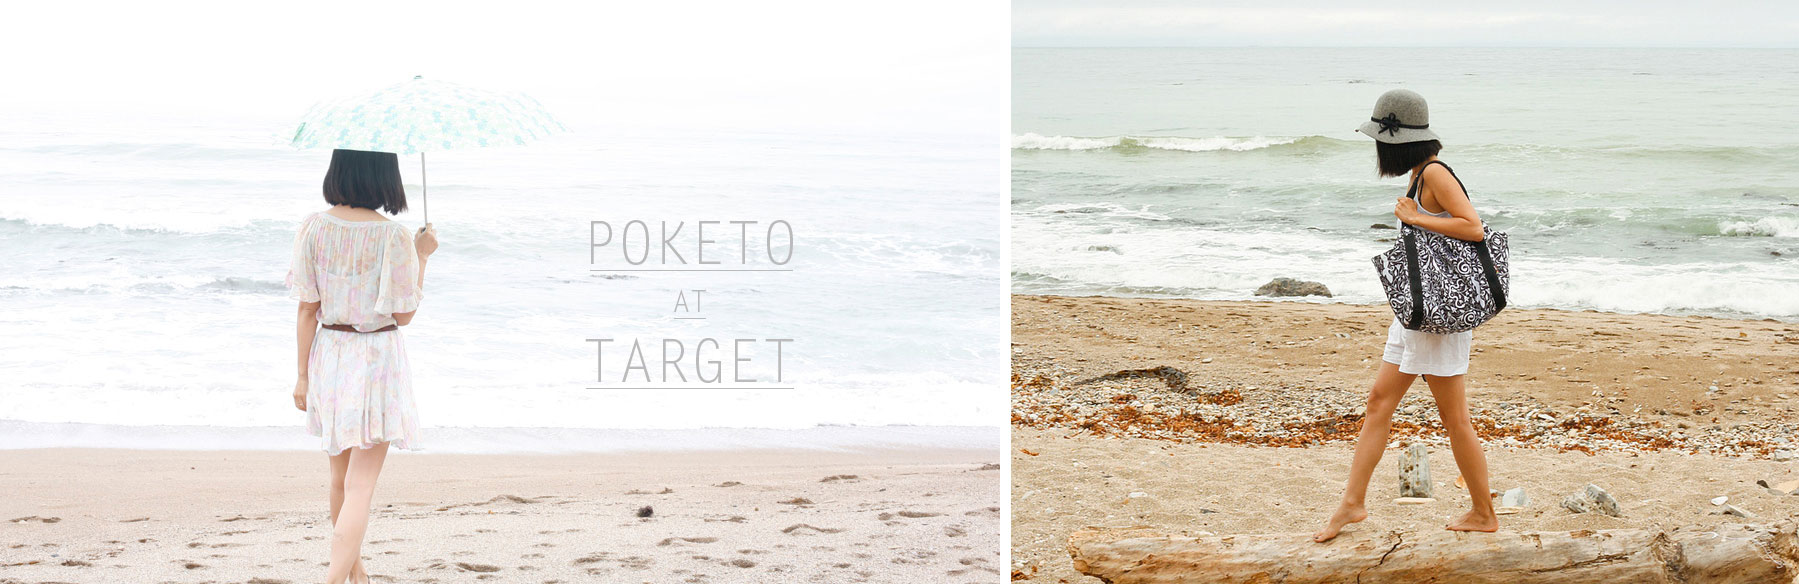 Poketo for Target campaign